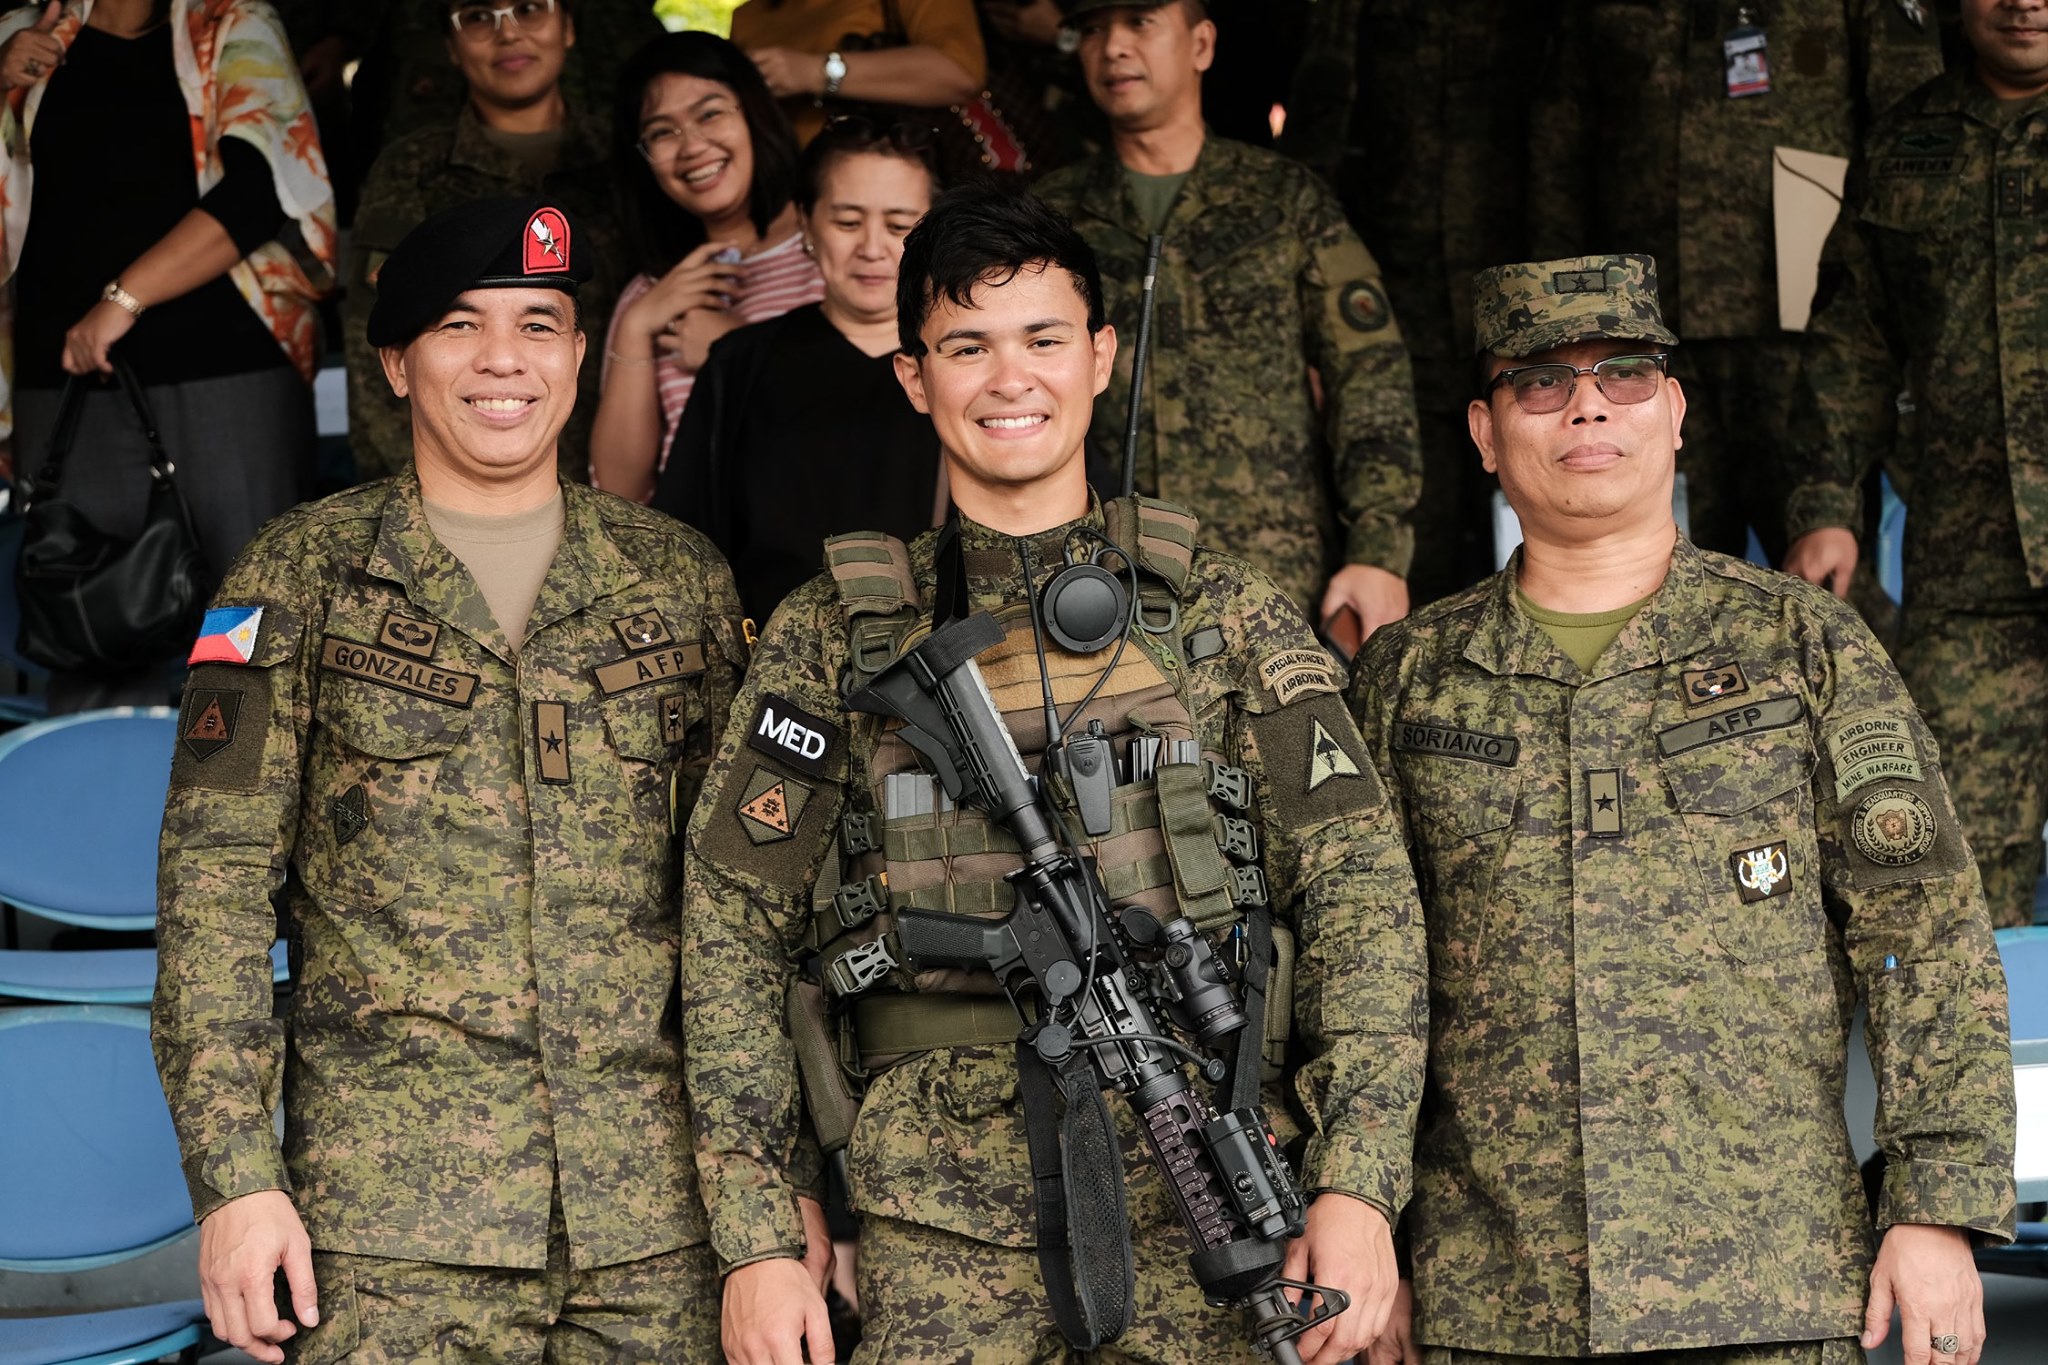 Matteo Guidicelli joins field demonstration at…